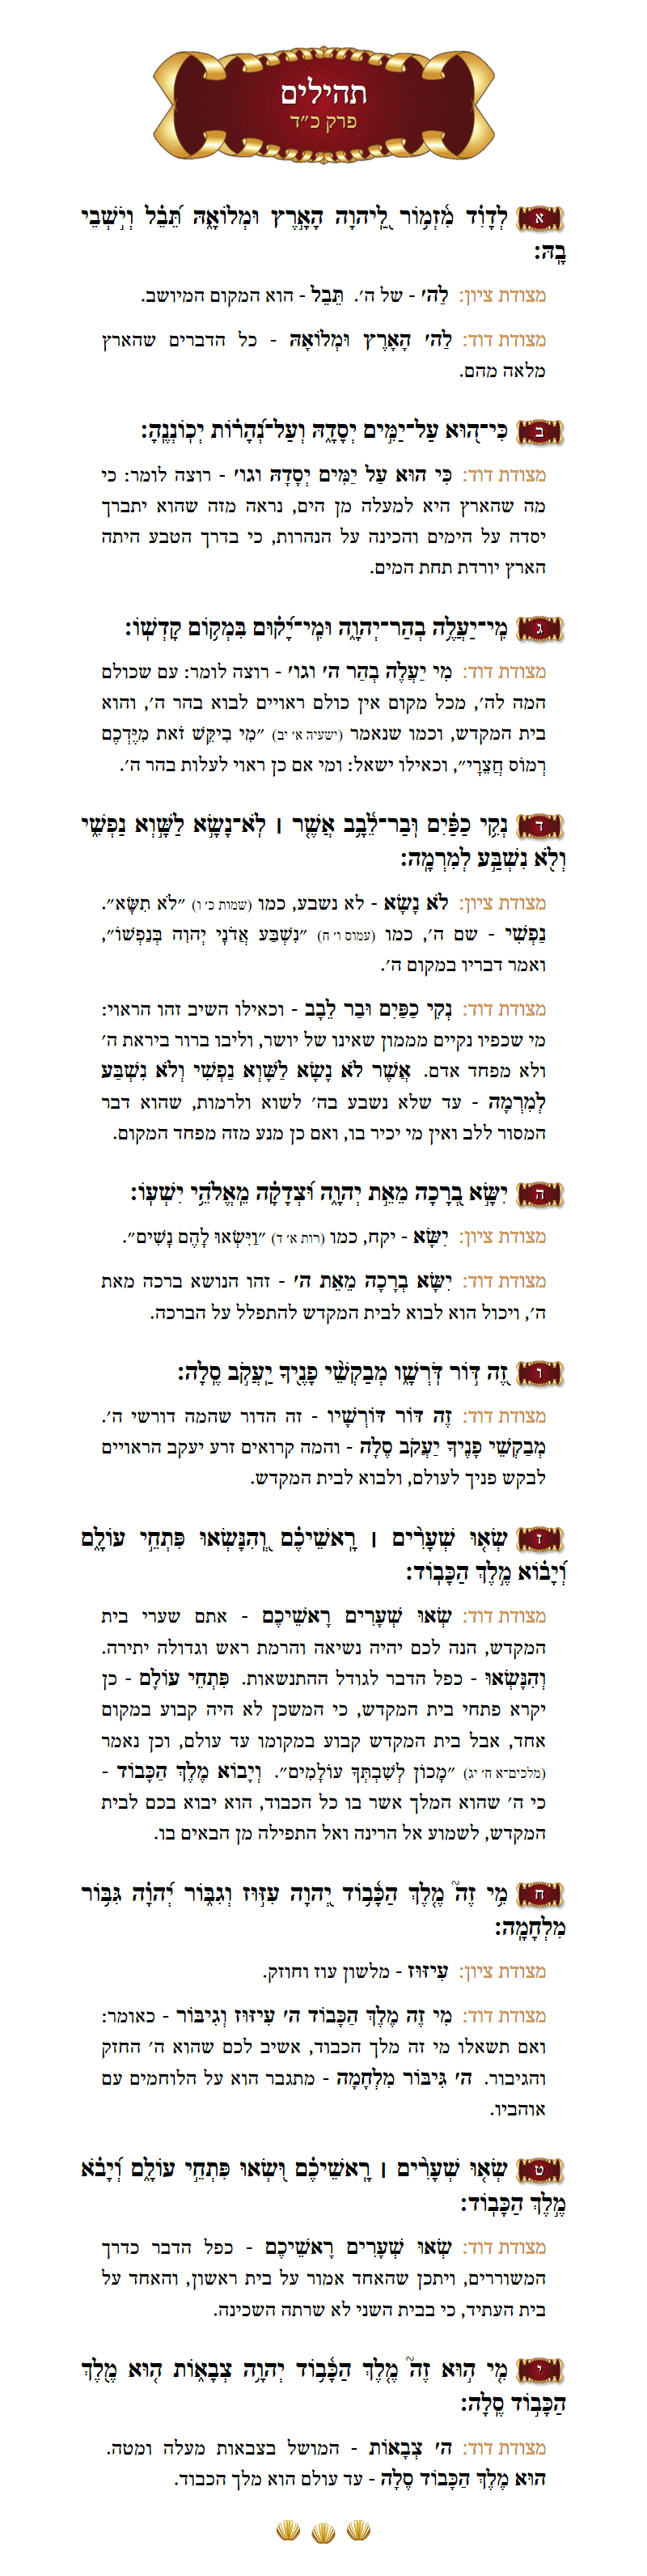 Sefer Tehillim Chapter 42 with commentary